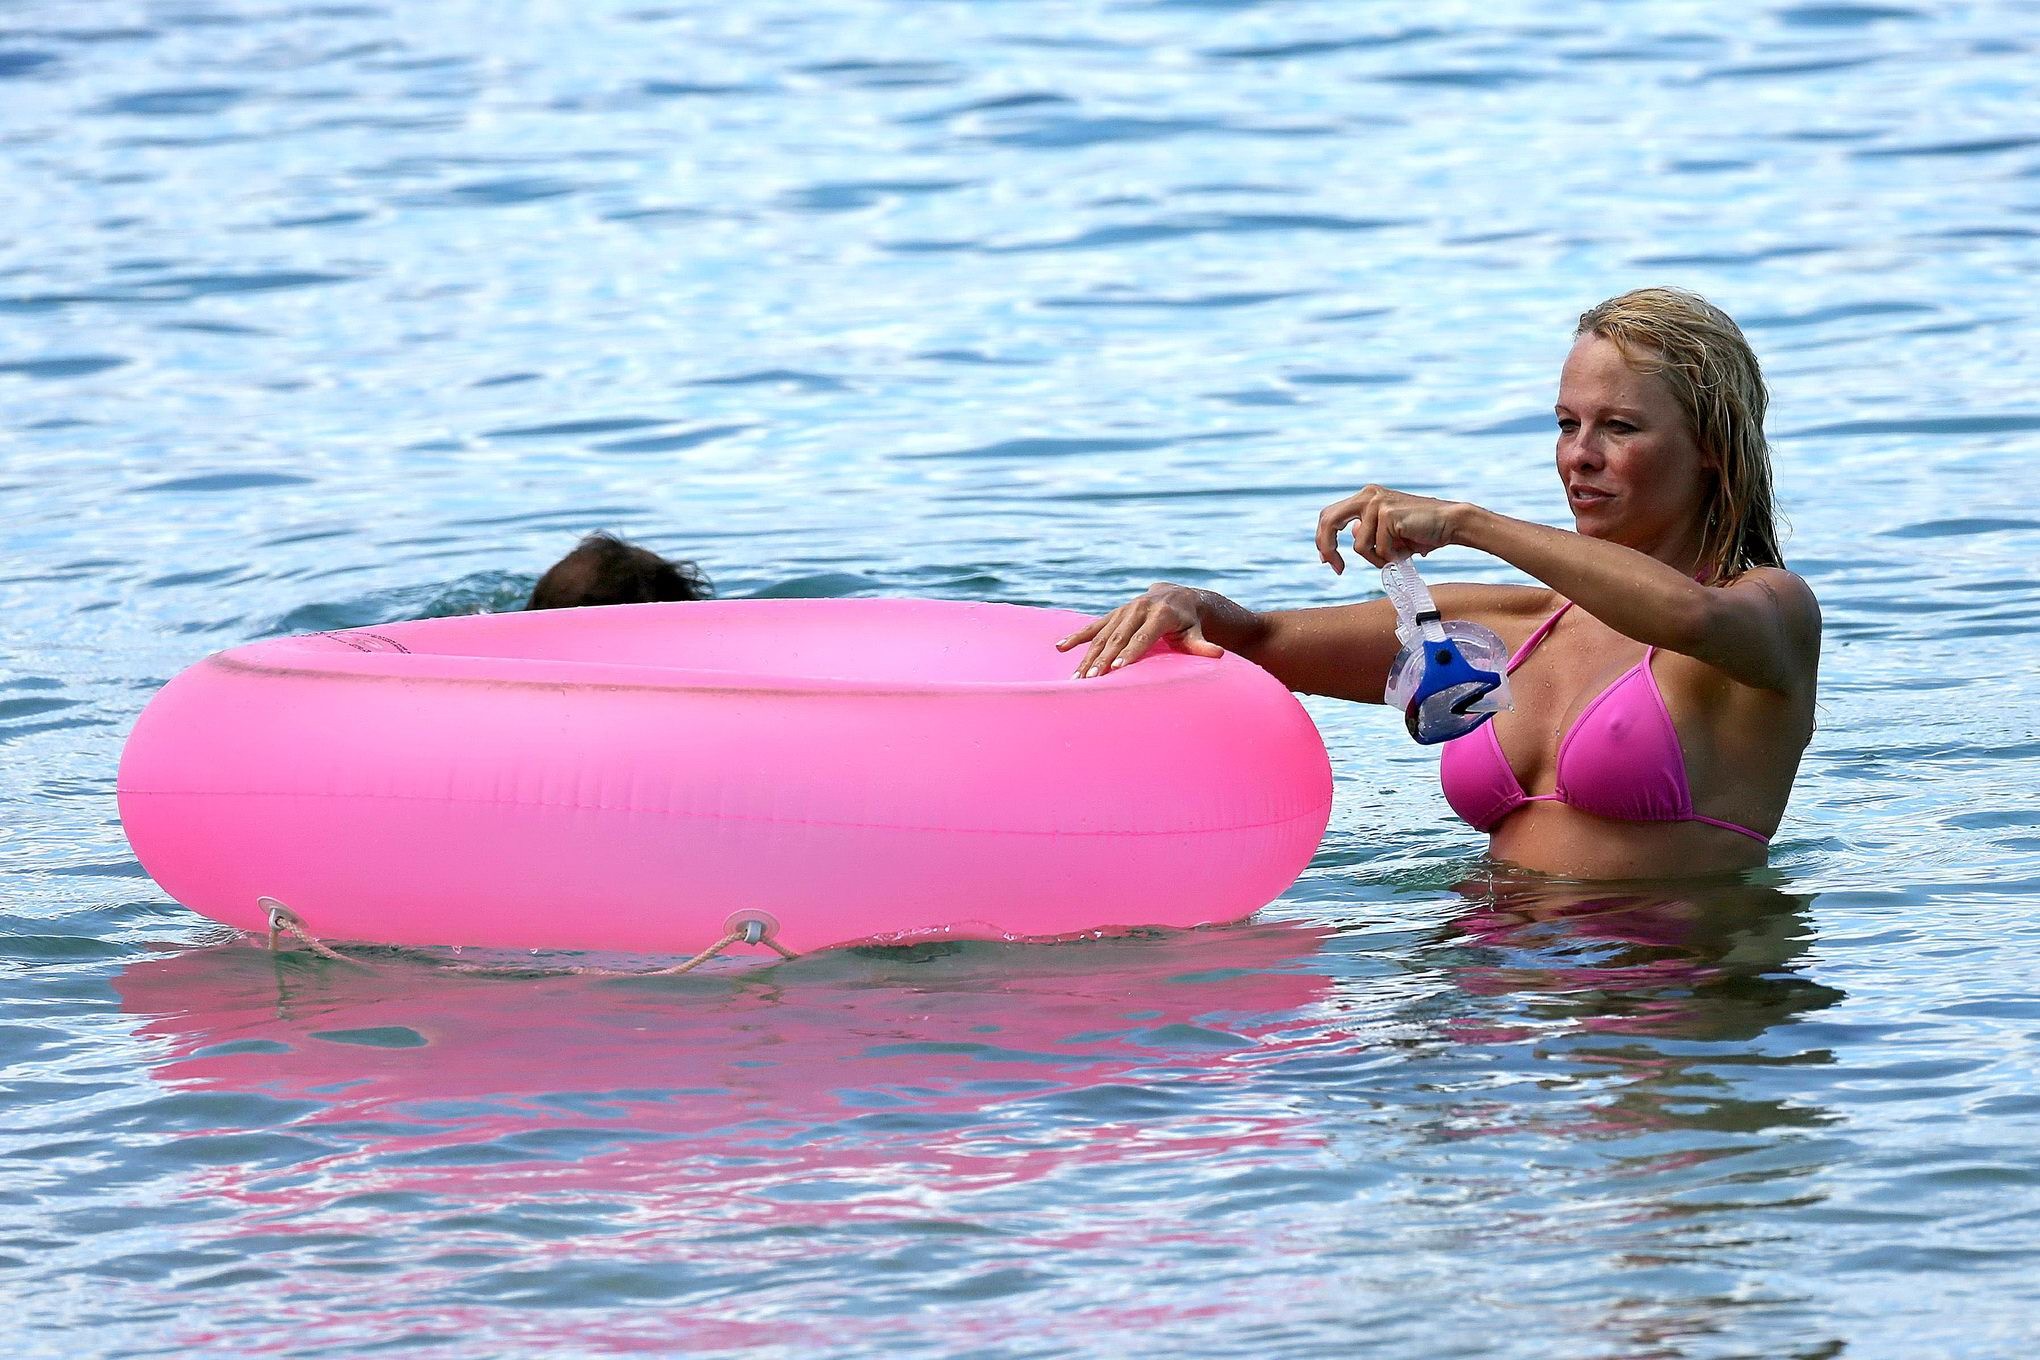 Busty Pamela Anderson Showing Pokies In A Wet Pink Bikini While Snorkeling On A 